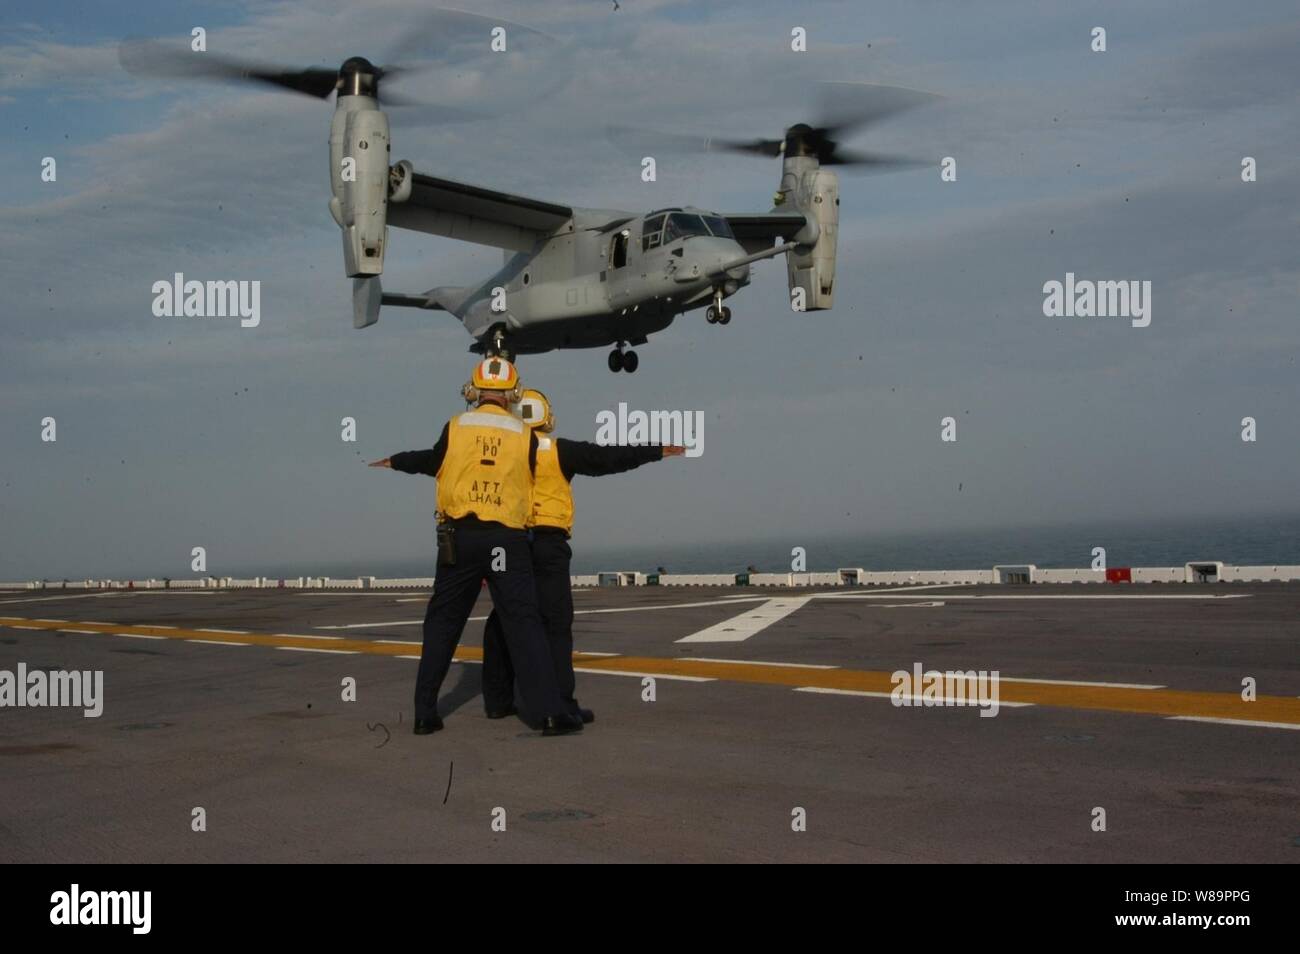 Flight deck crewmen signal the pilots of a U.S. Marine Corps MV-22 Osprey as it comes in for a landing on the USS Nassau (LHA 4) while underway in the Atlantic Ocean on March 23, 2005.  The Osprey is a vertical takeoff and landing tiltrotor aircraft designed for combat, combat support and special operations missions worldwide.  The flight deck crew of the Nassau worked with the Osprey for the first time during a weeklong familiarization at sea.  The Osprey is attached to Tilt-Rotor Operational Test Squadron 22 from Marine Corps Air Station New River, N.C. Stock Photo